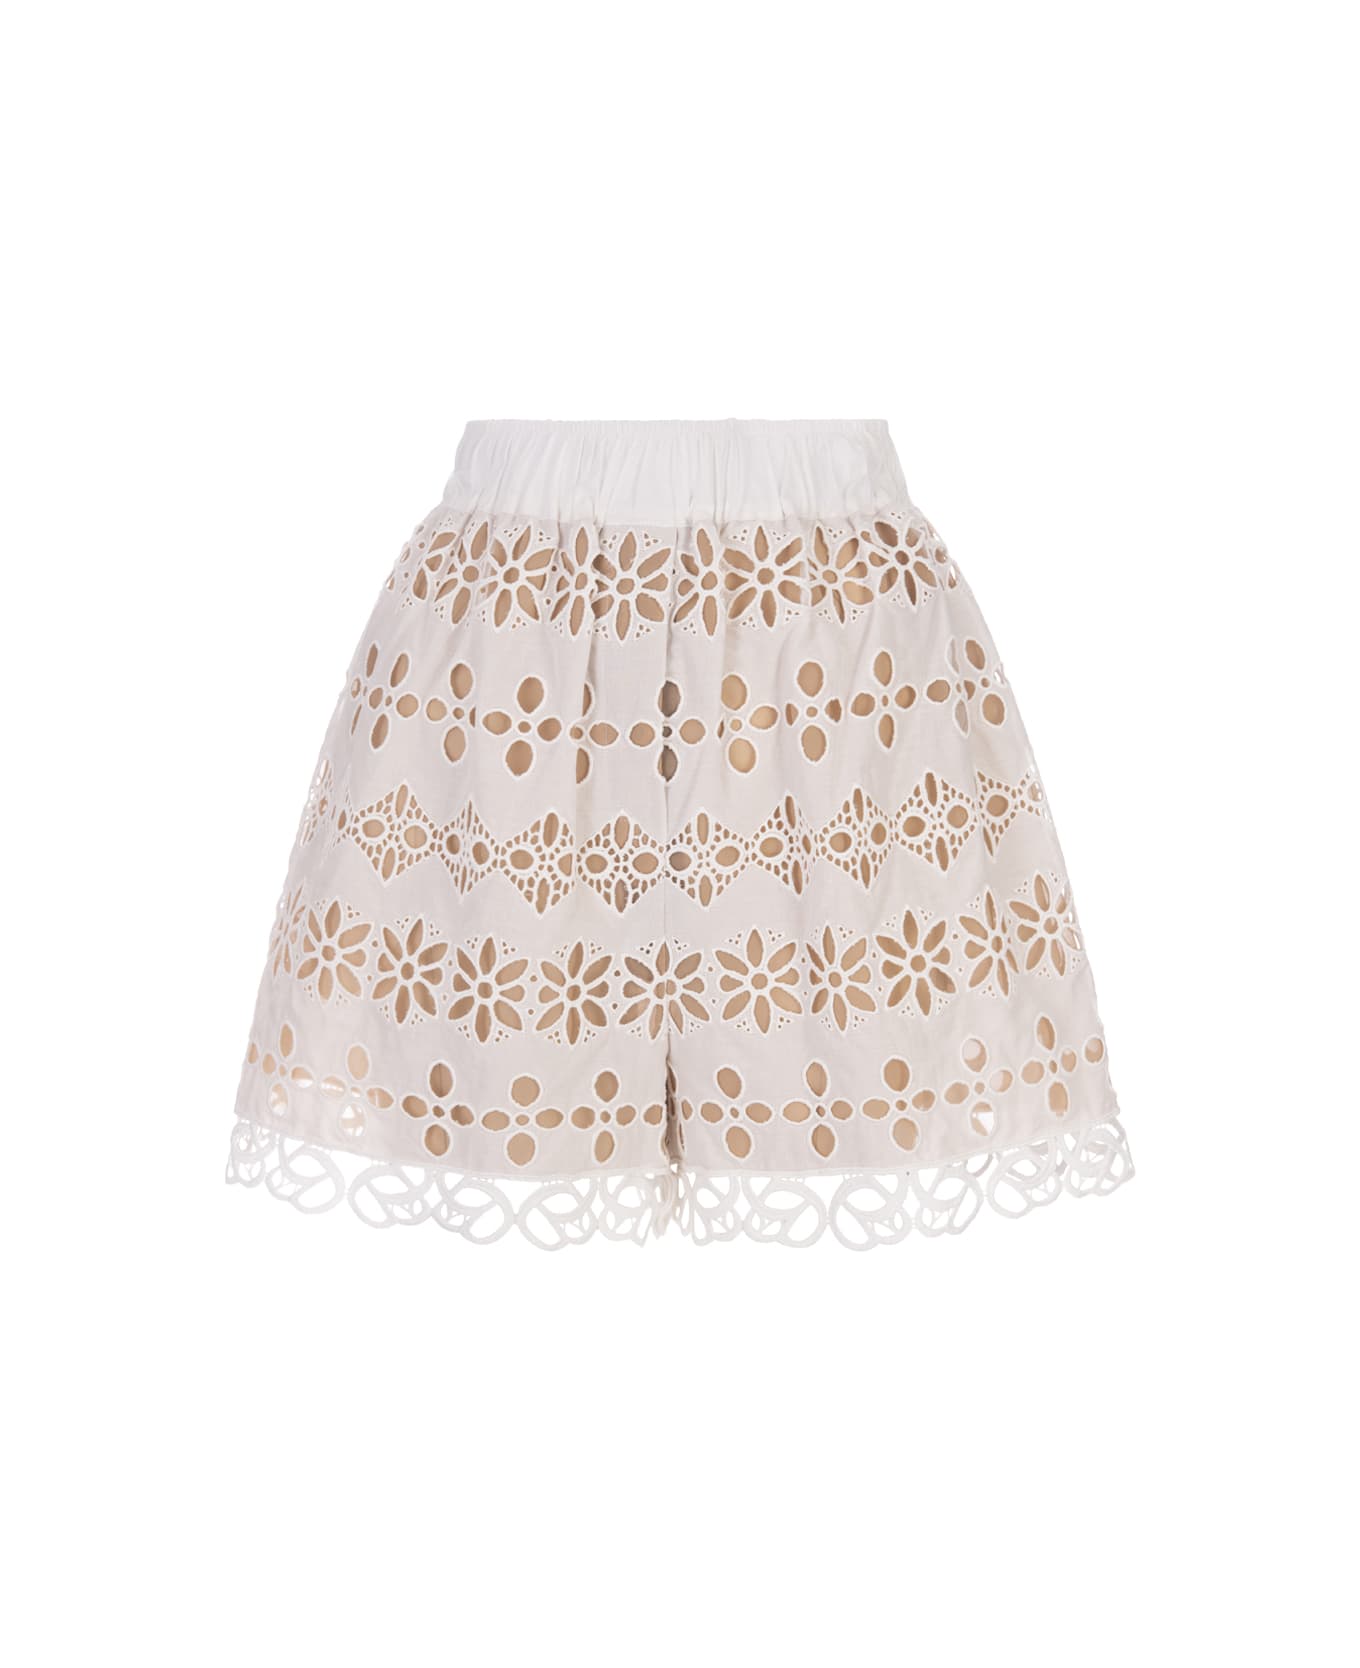 Elie Saab Broderie Anglaise Shorts - White